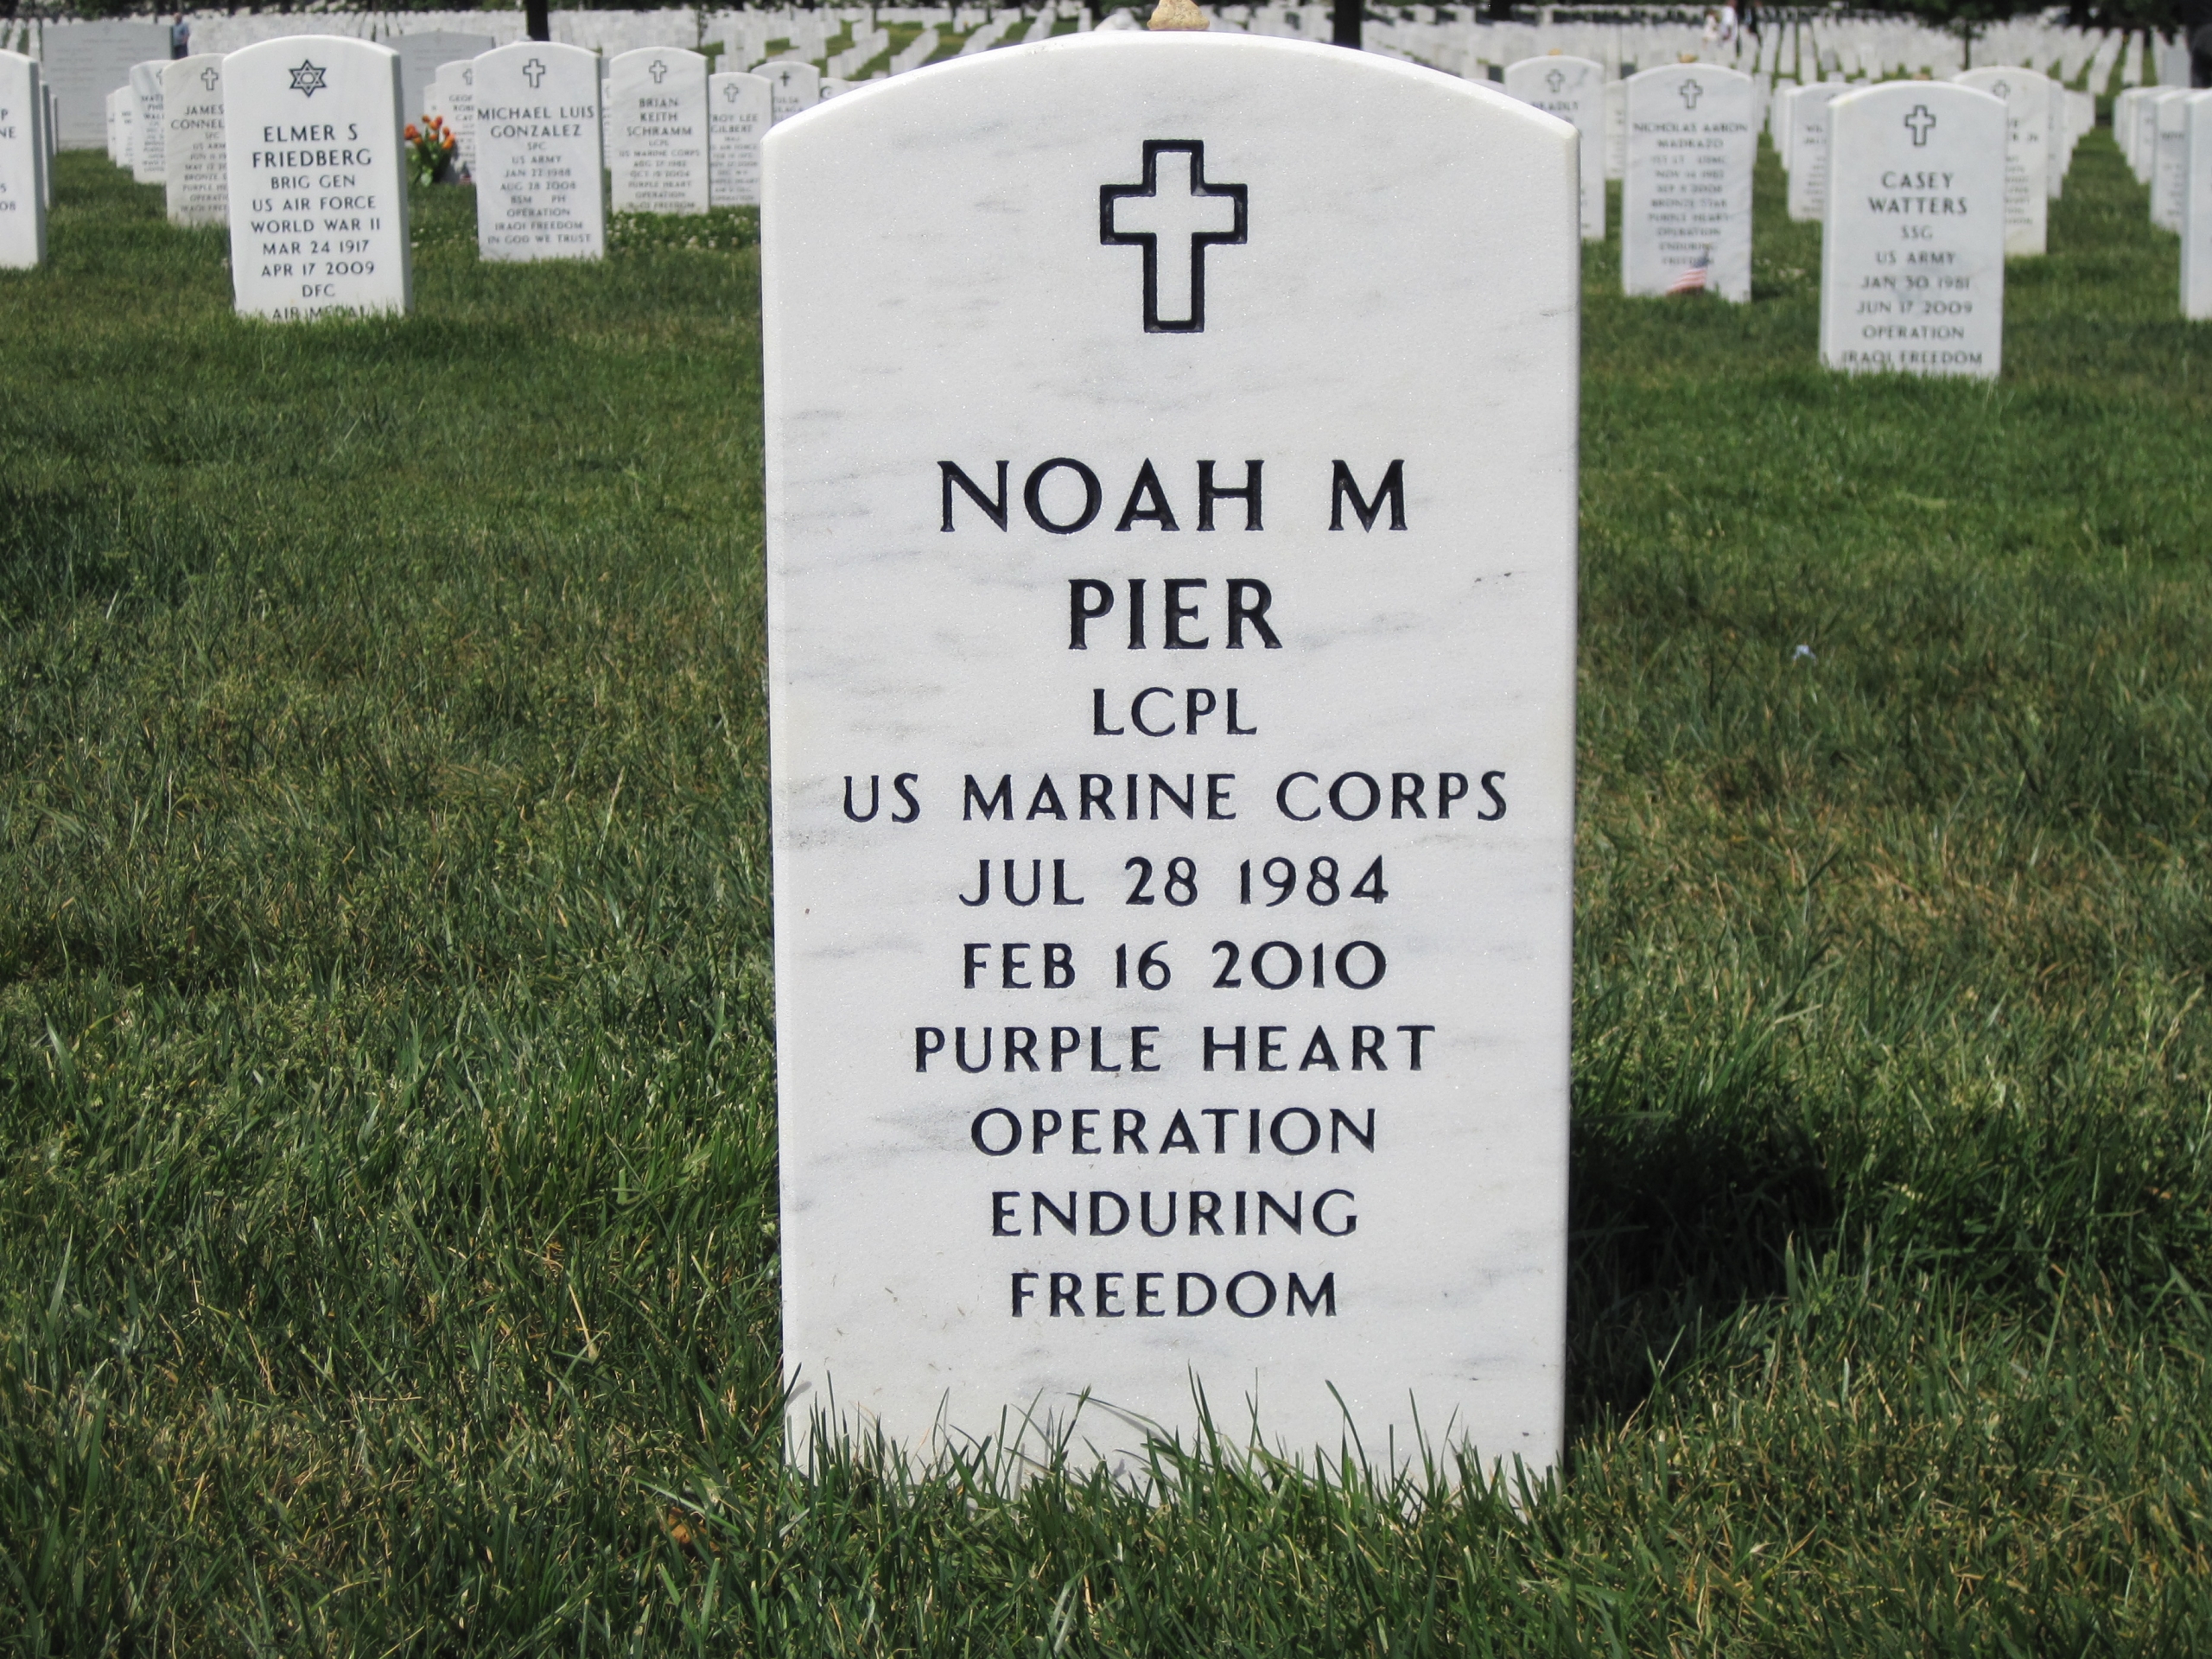 nmpier-gravesite-photo-by-eileen-horan-may-2010-002